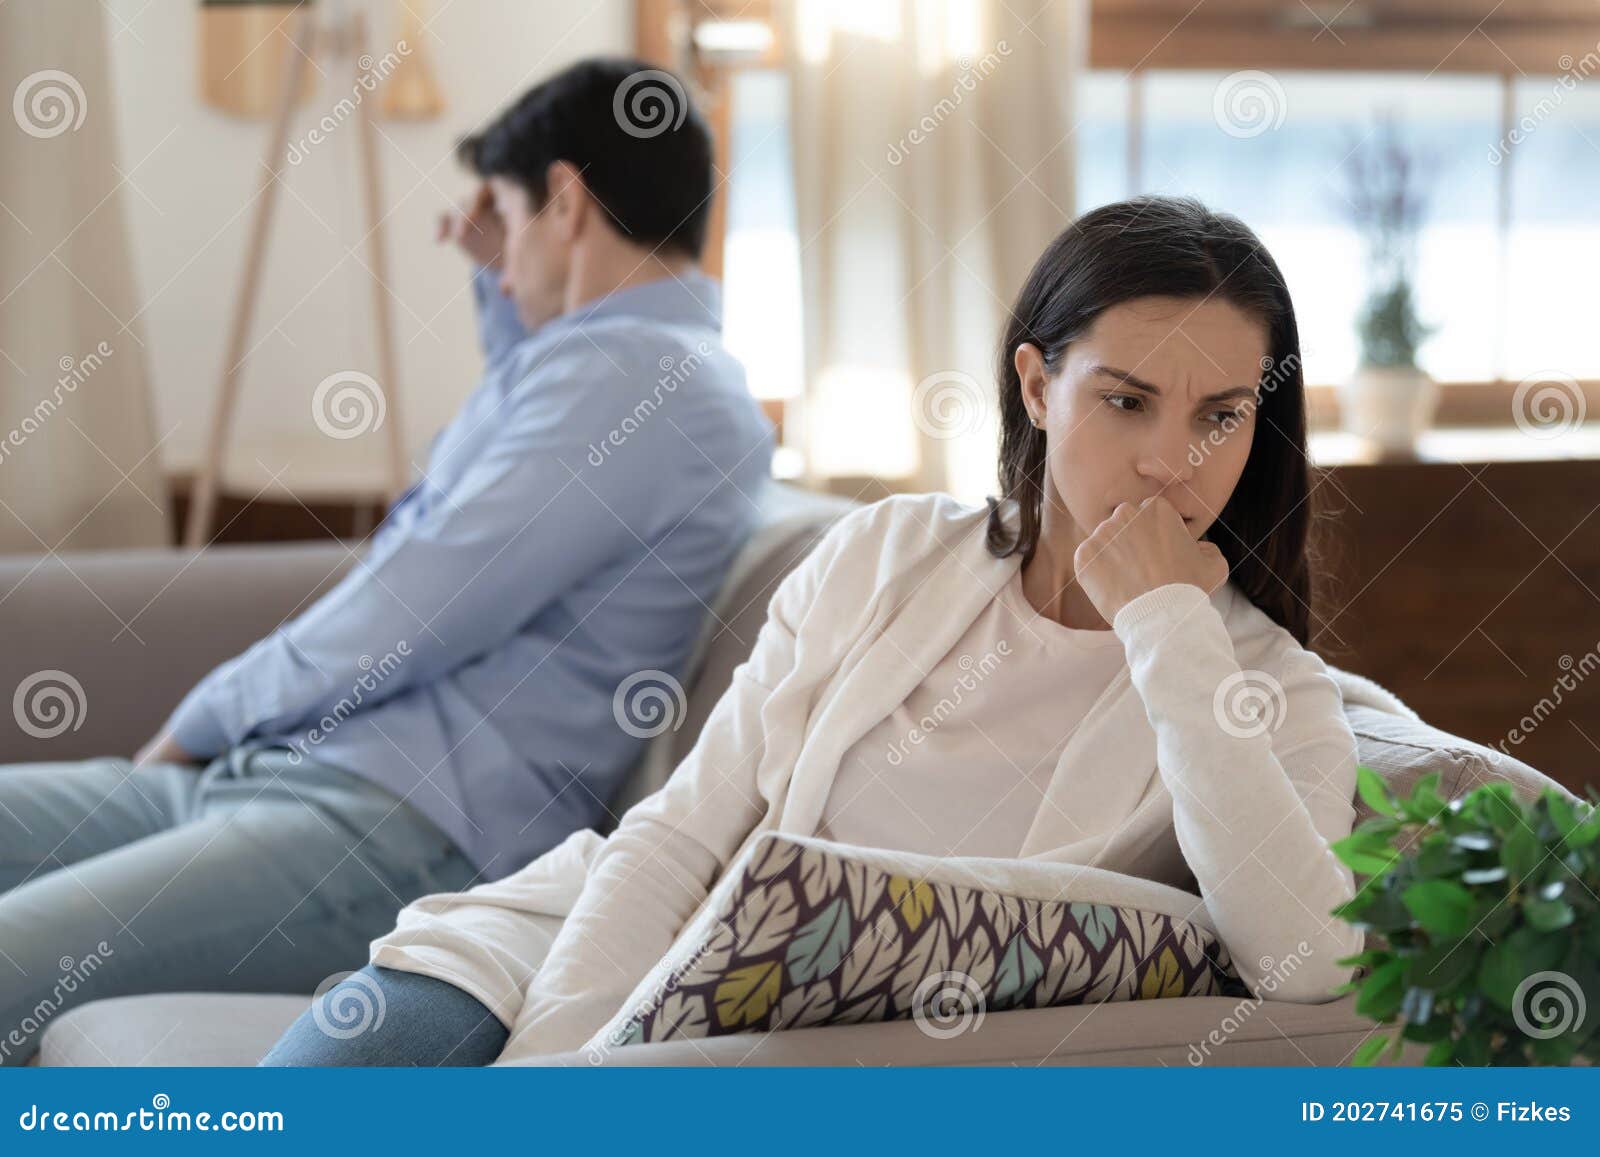 nervous young couple sitting on sofa keeping silence after argument